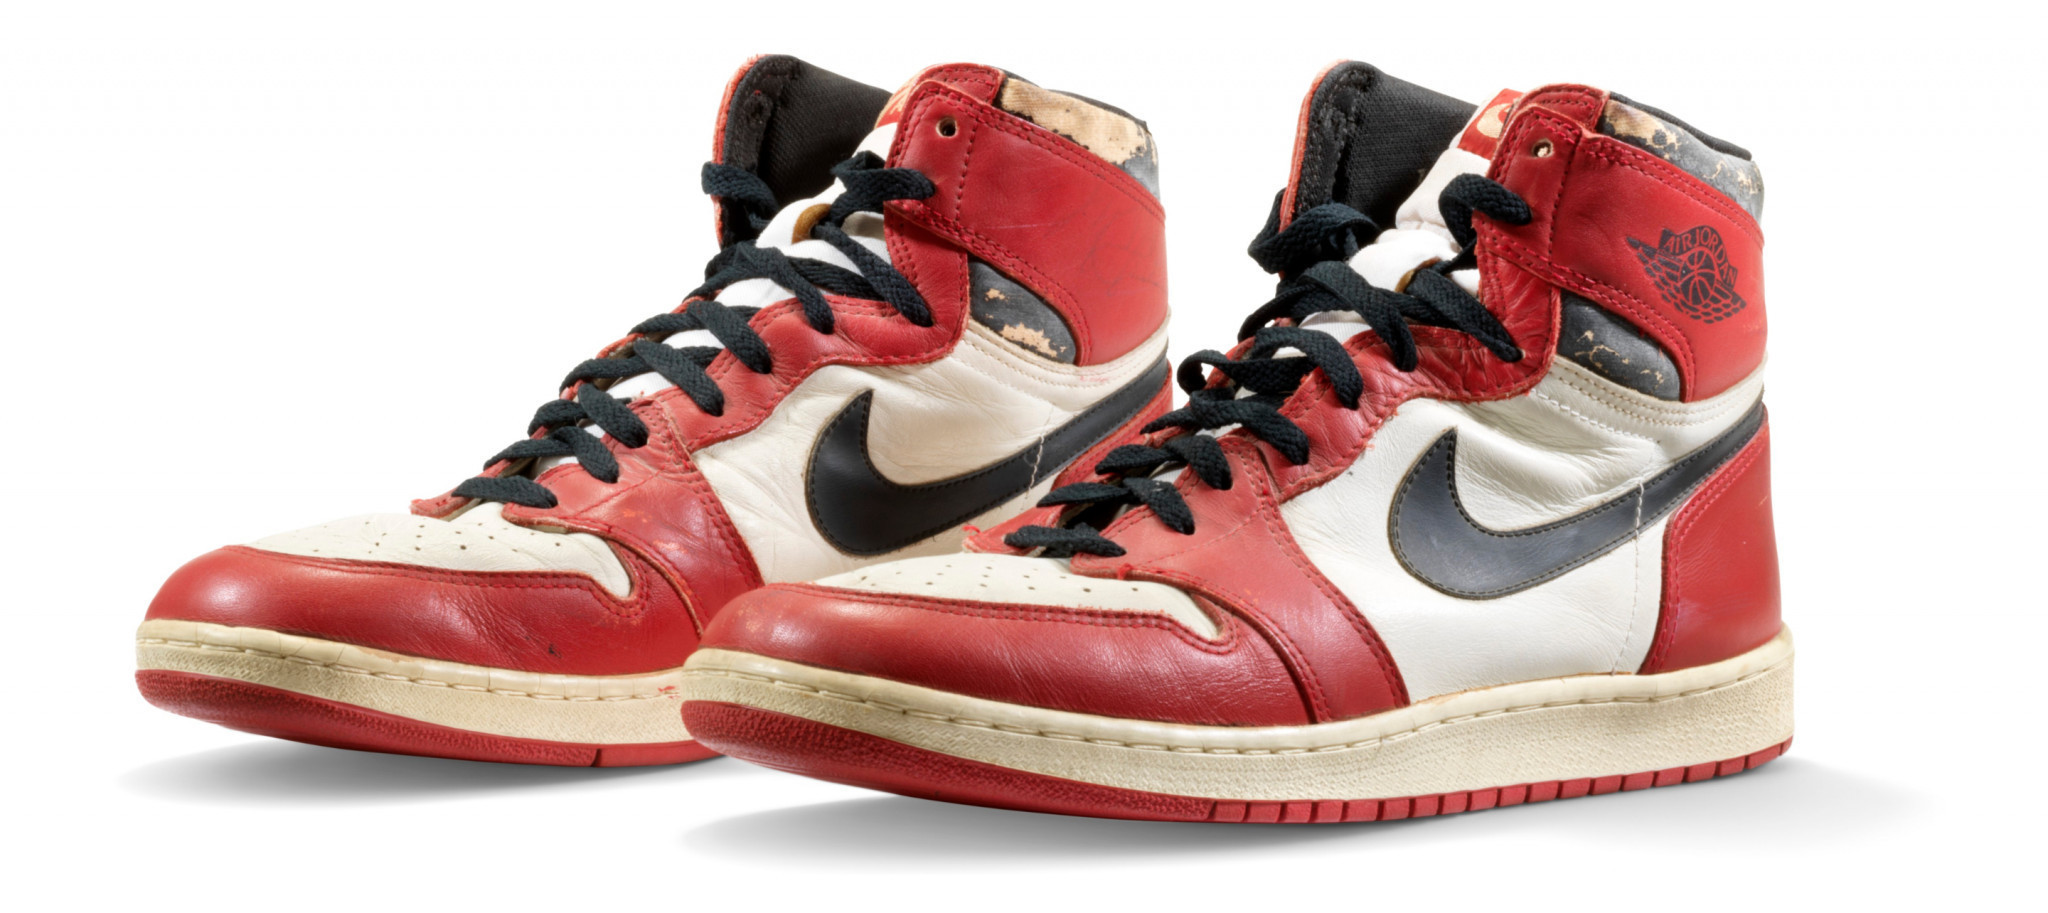 A rare pair of trainers worn by Michael Jordan during his rookie season have sold for a record $615,000 at auction ©Christie's